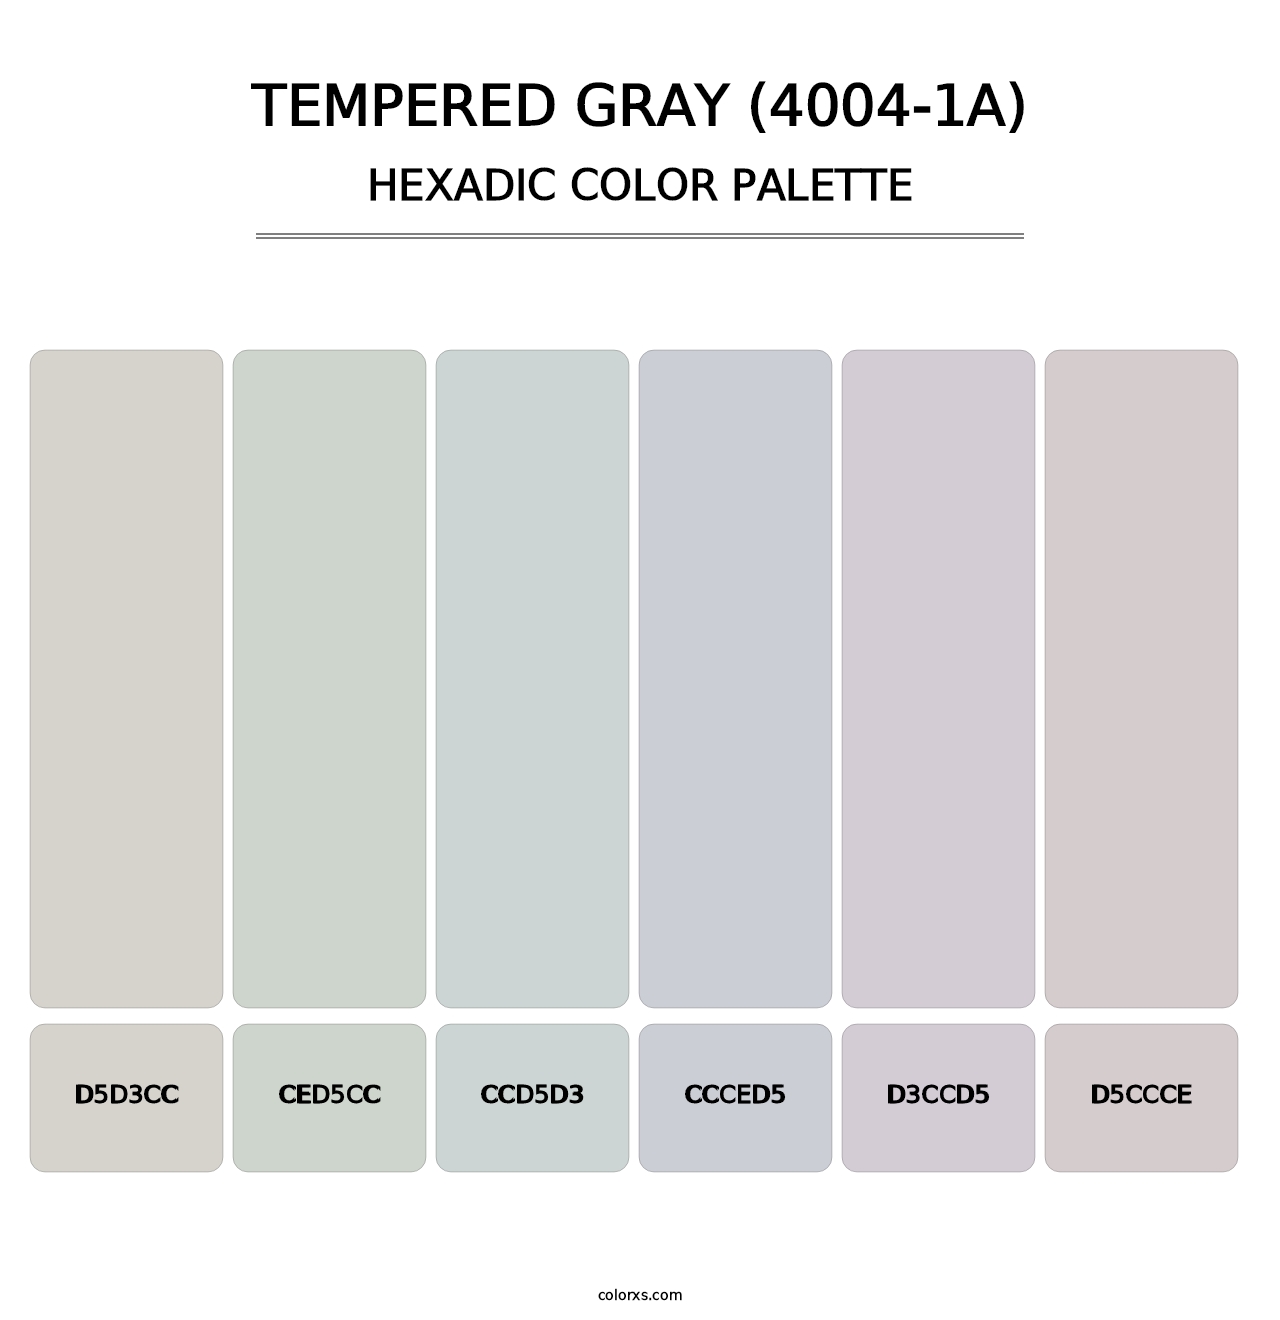 Tempered Gray (4004-1A) - Hexadic Color Palette